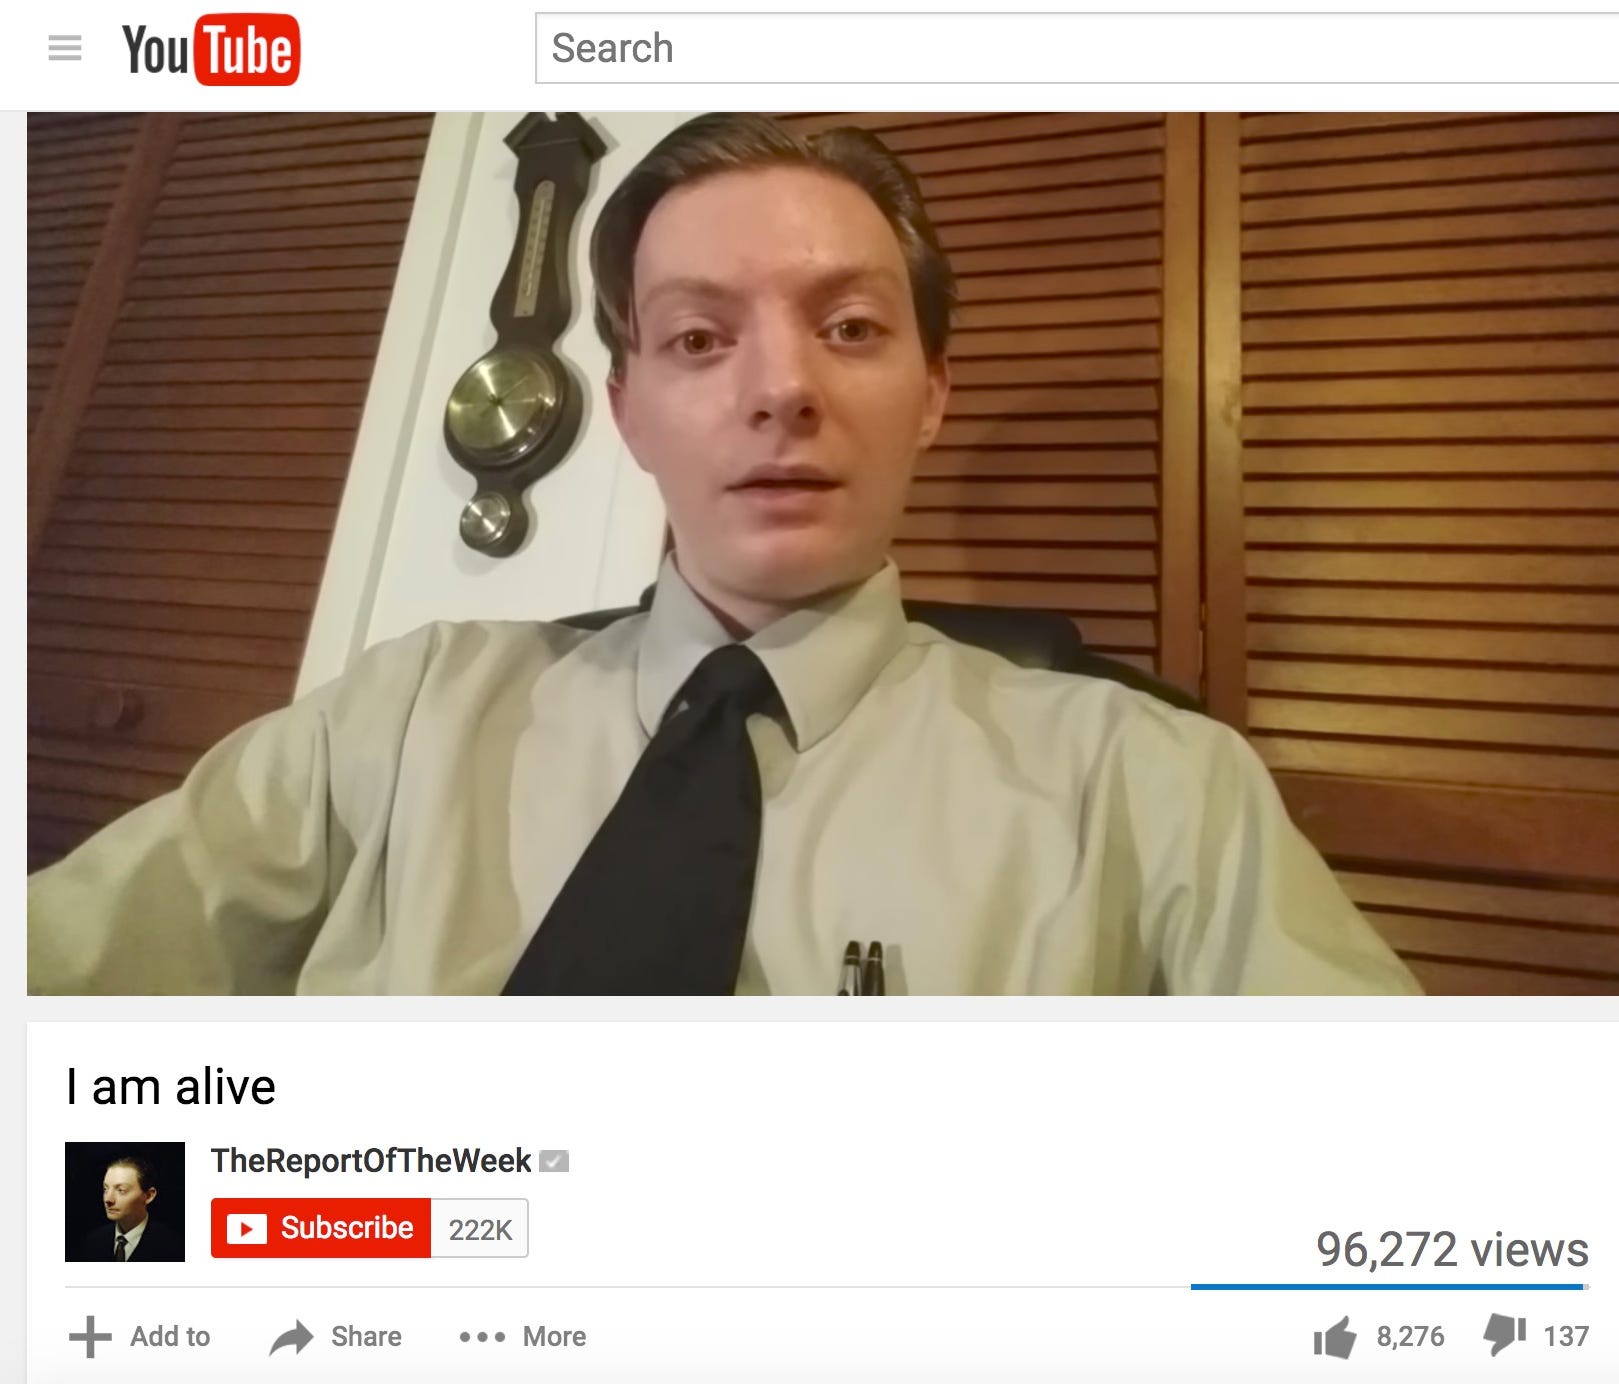 YouTube star TheReportOfTheWeek posted a video Monday, May 22, 2017 to let viewers know he was alive and to debunk the idea he was in Manchester, England, at an Ariana Grande concert where a bombing occurred.